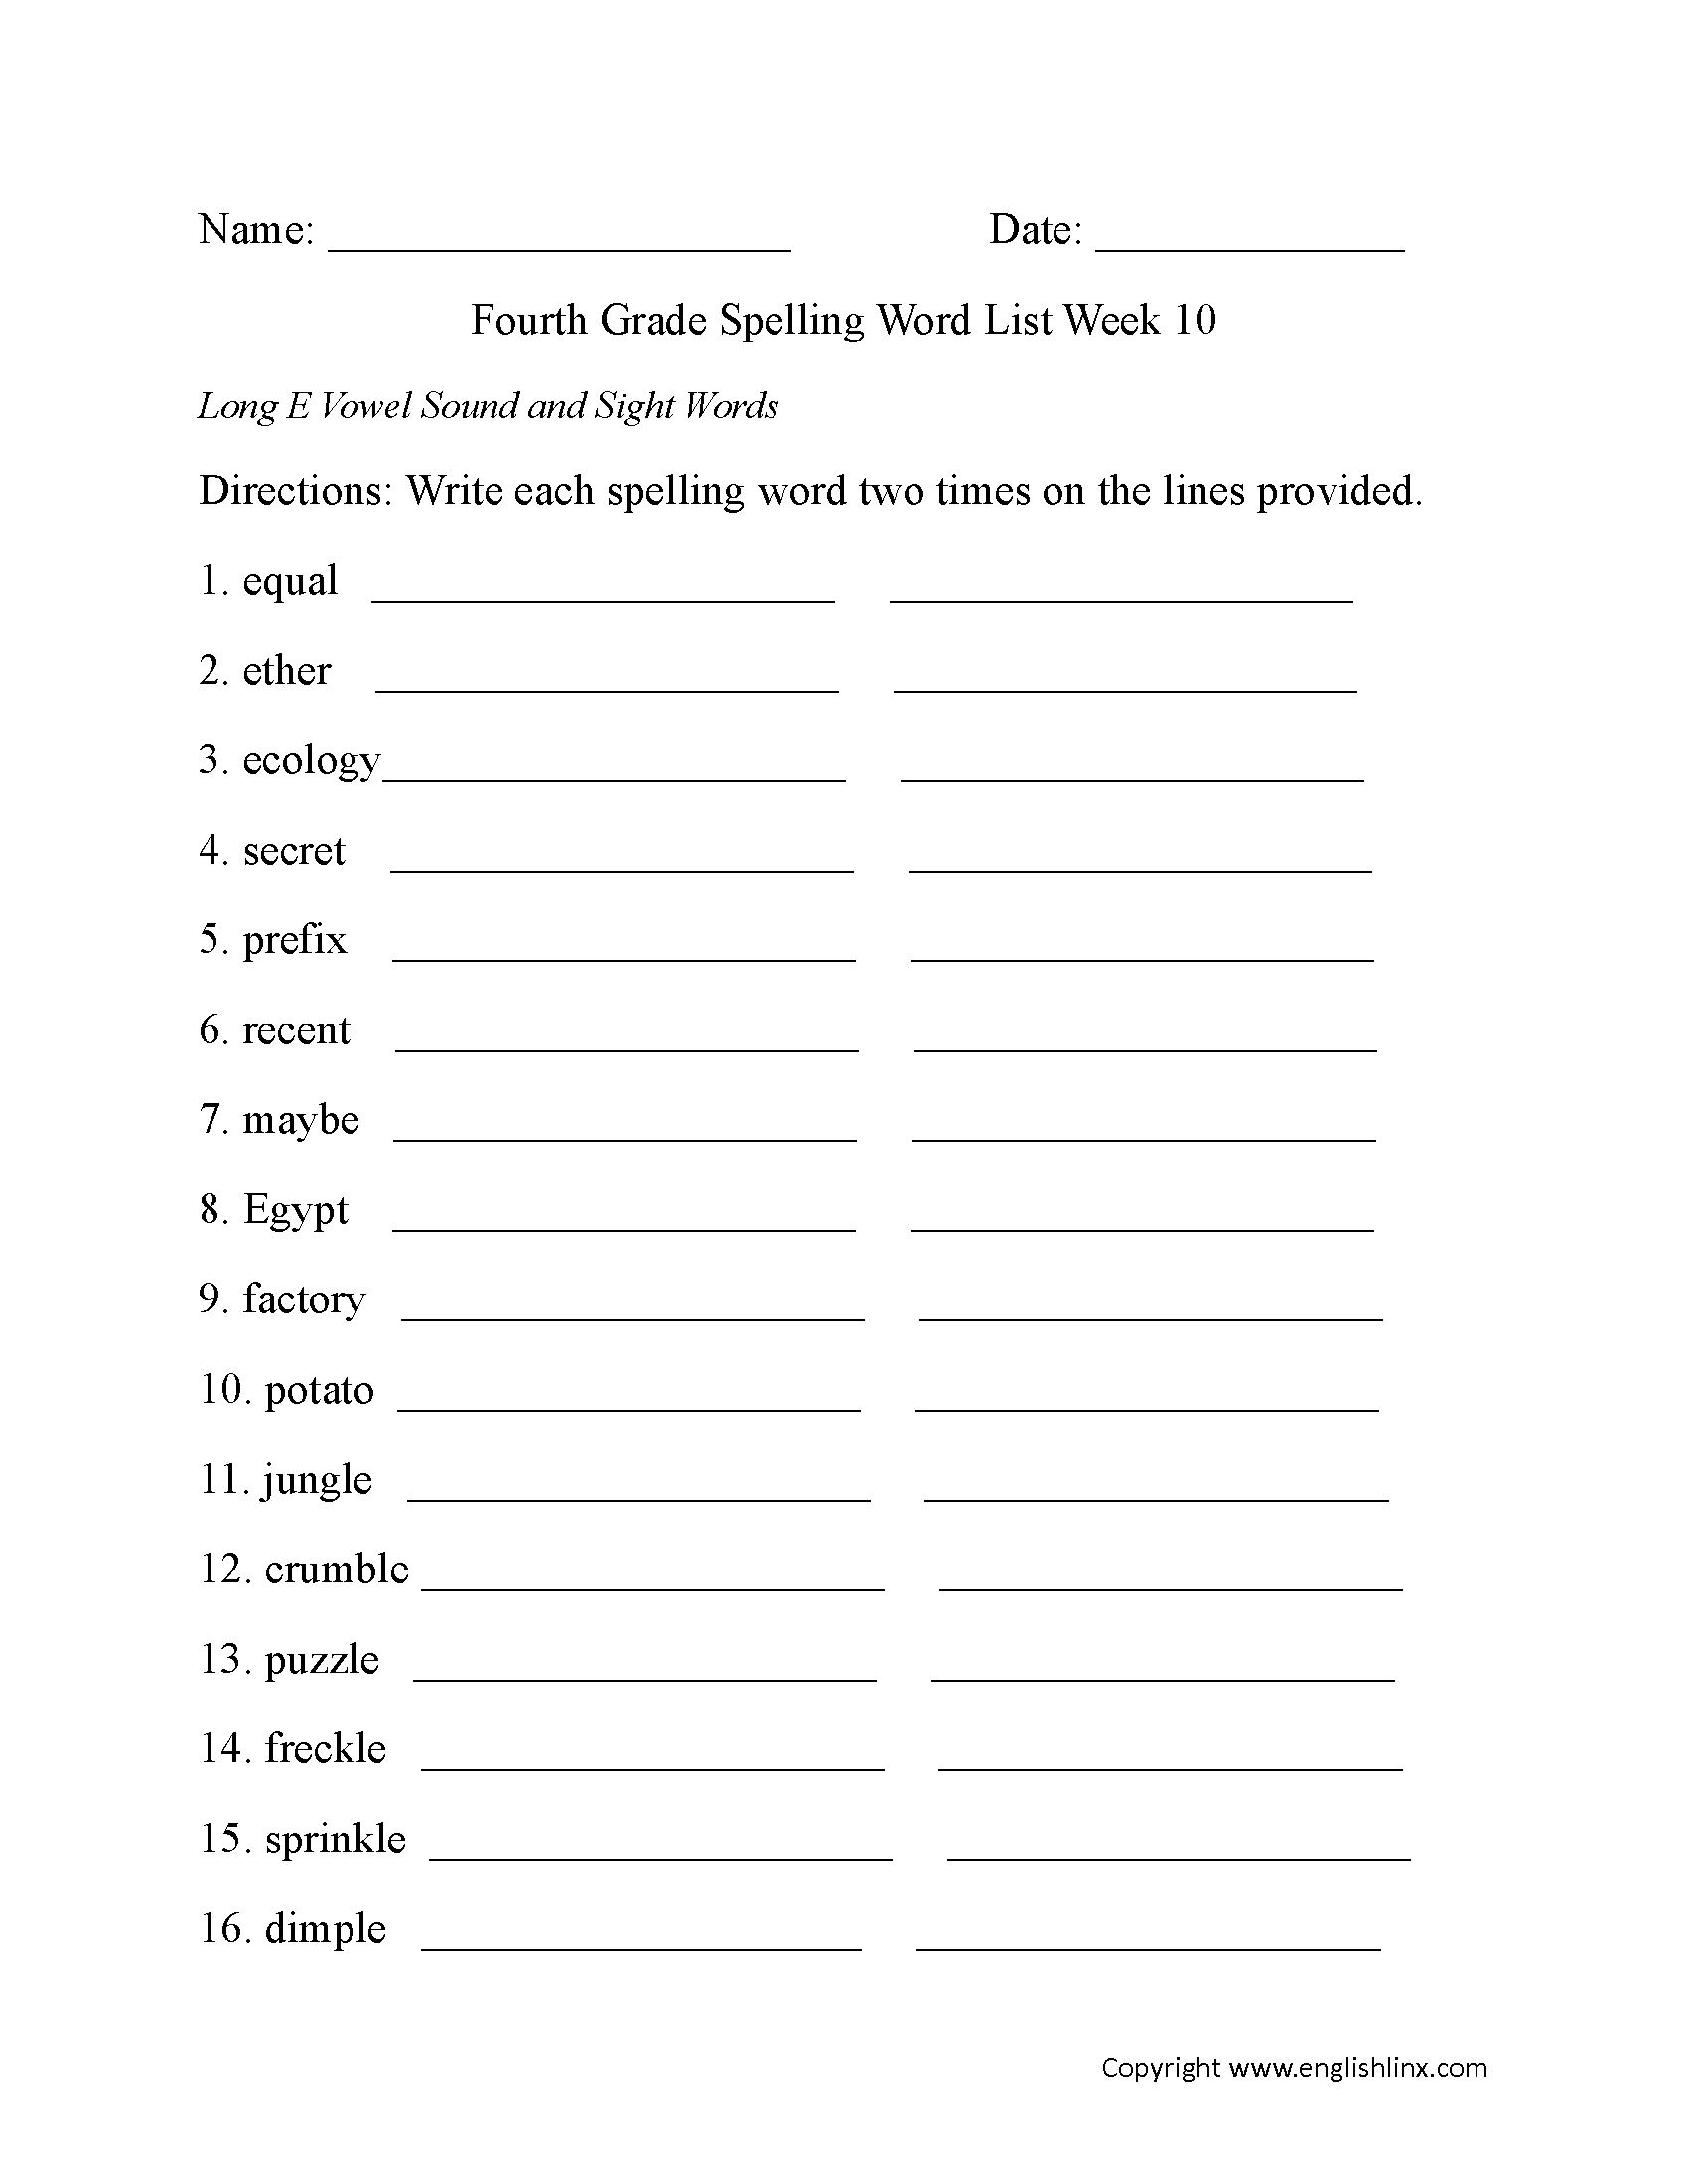 Week 10 Long E Vowel and Sight Words Fourth Grade Spelling Words Worksheets